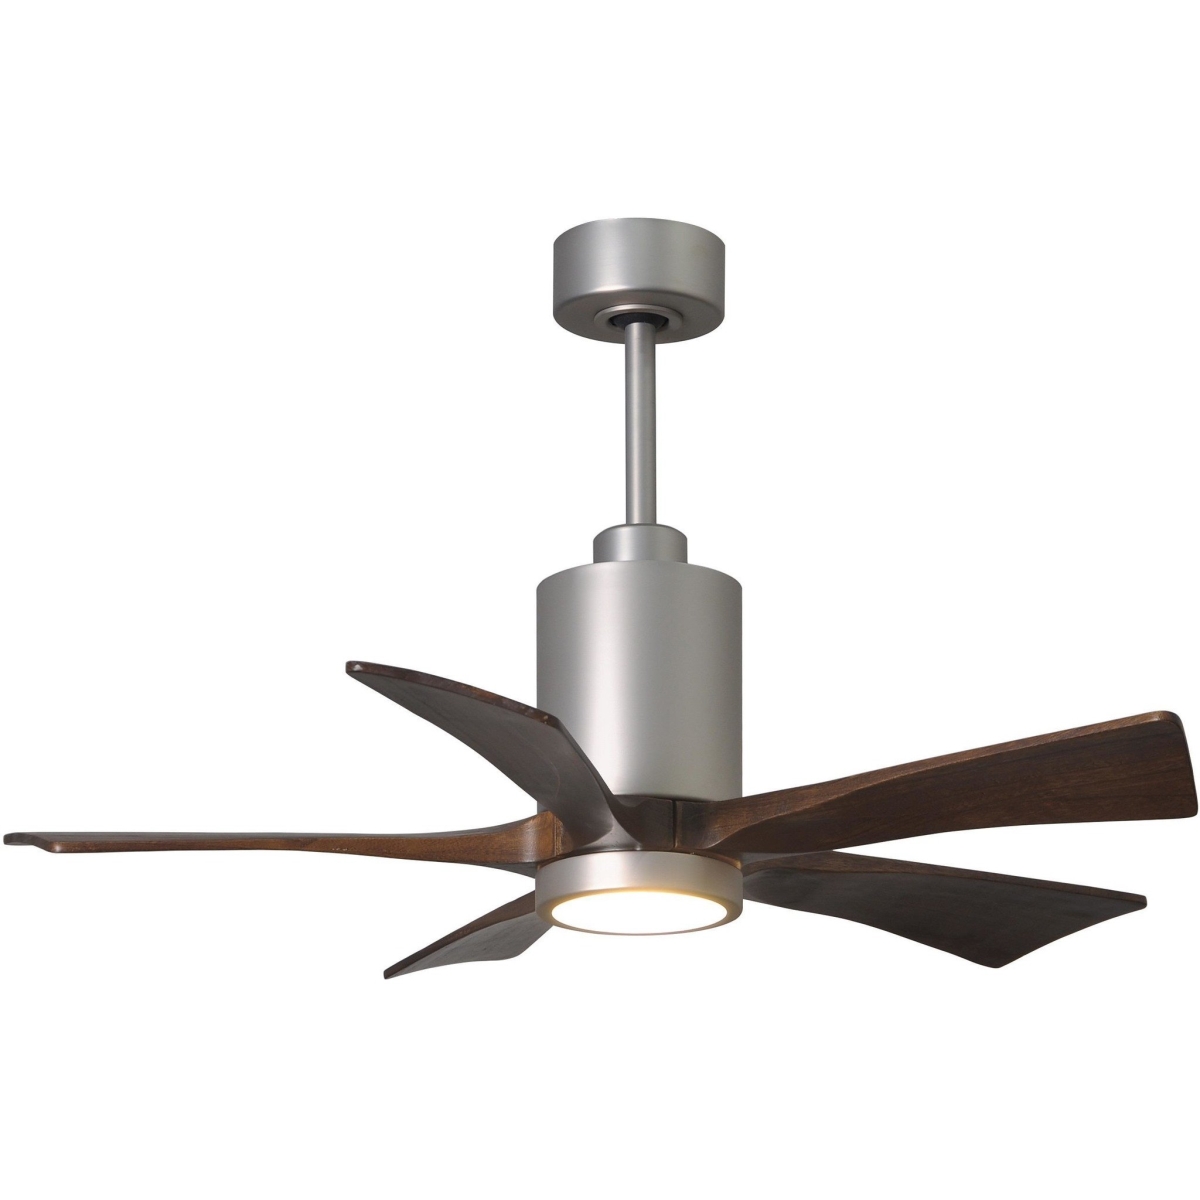 Picture of Atlas PA5-BN-BW-52 60 in. Three Bladed Paddle Fan with LED Light Kit in Brushed Nickel